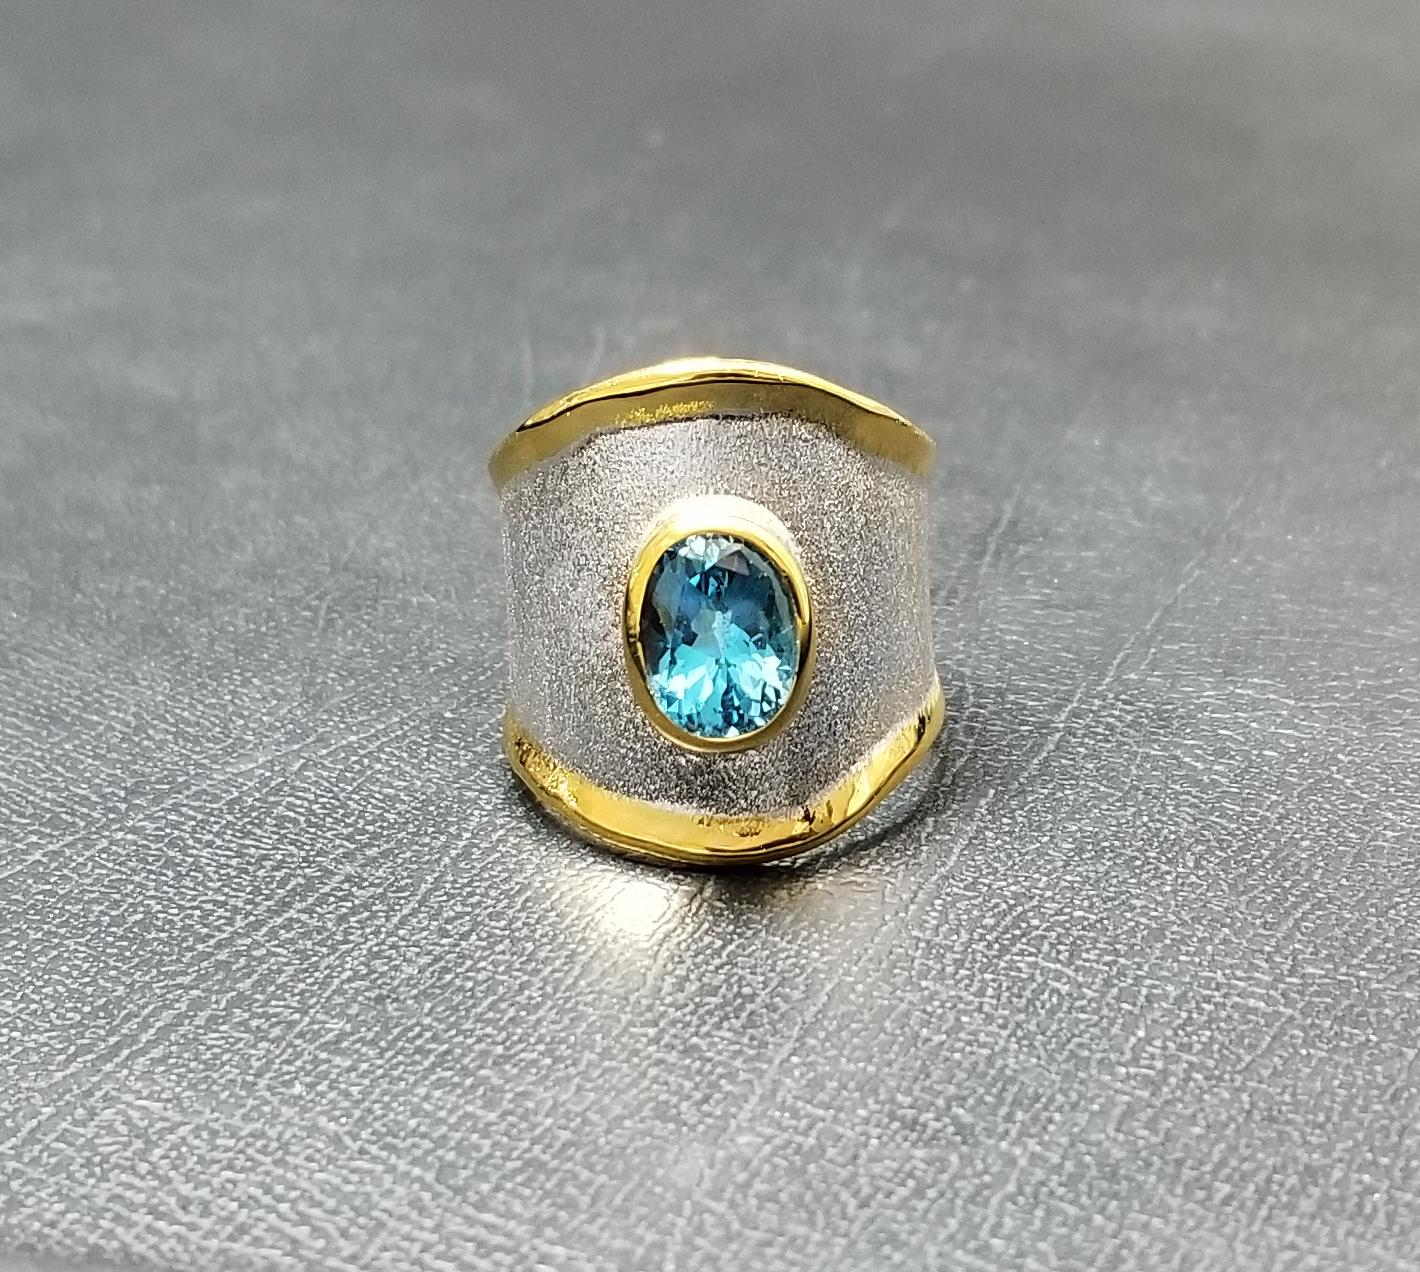 Yianni Creations 1.60 Carat Blue Topaz Ring in Fine Silver and 24 Karat Gold (Ovalschliff)